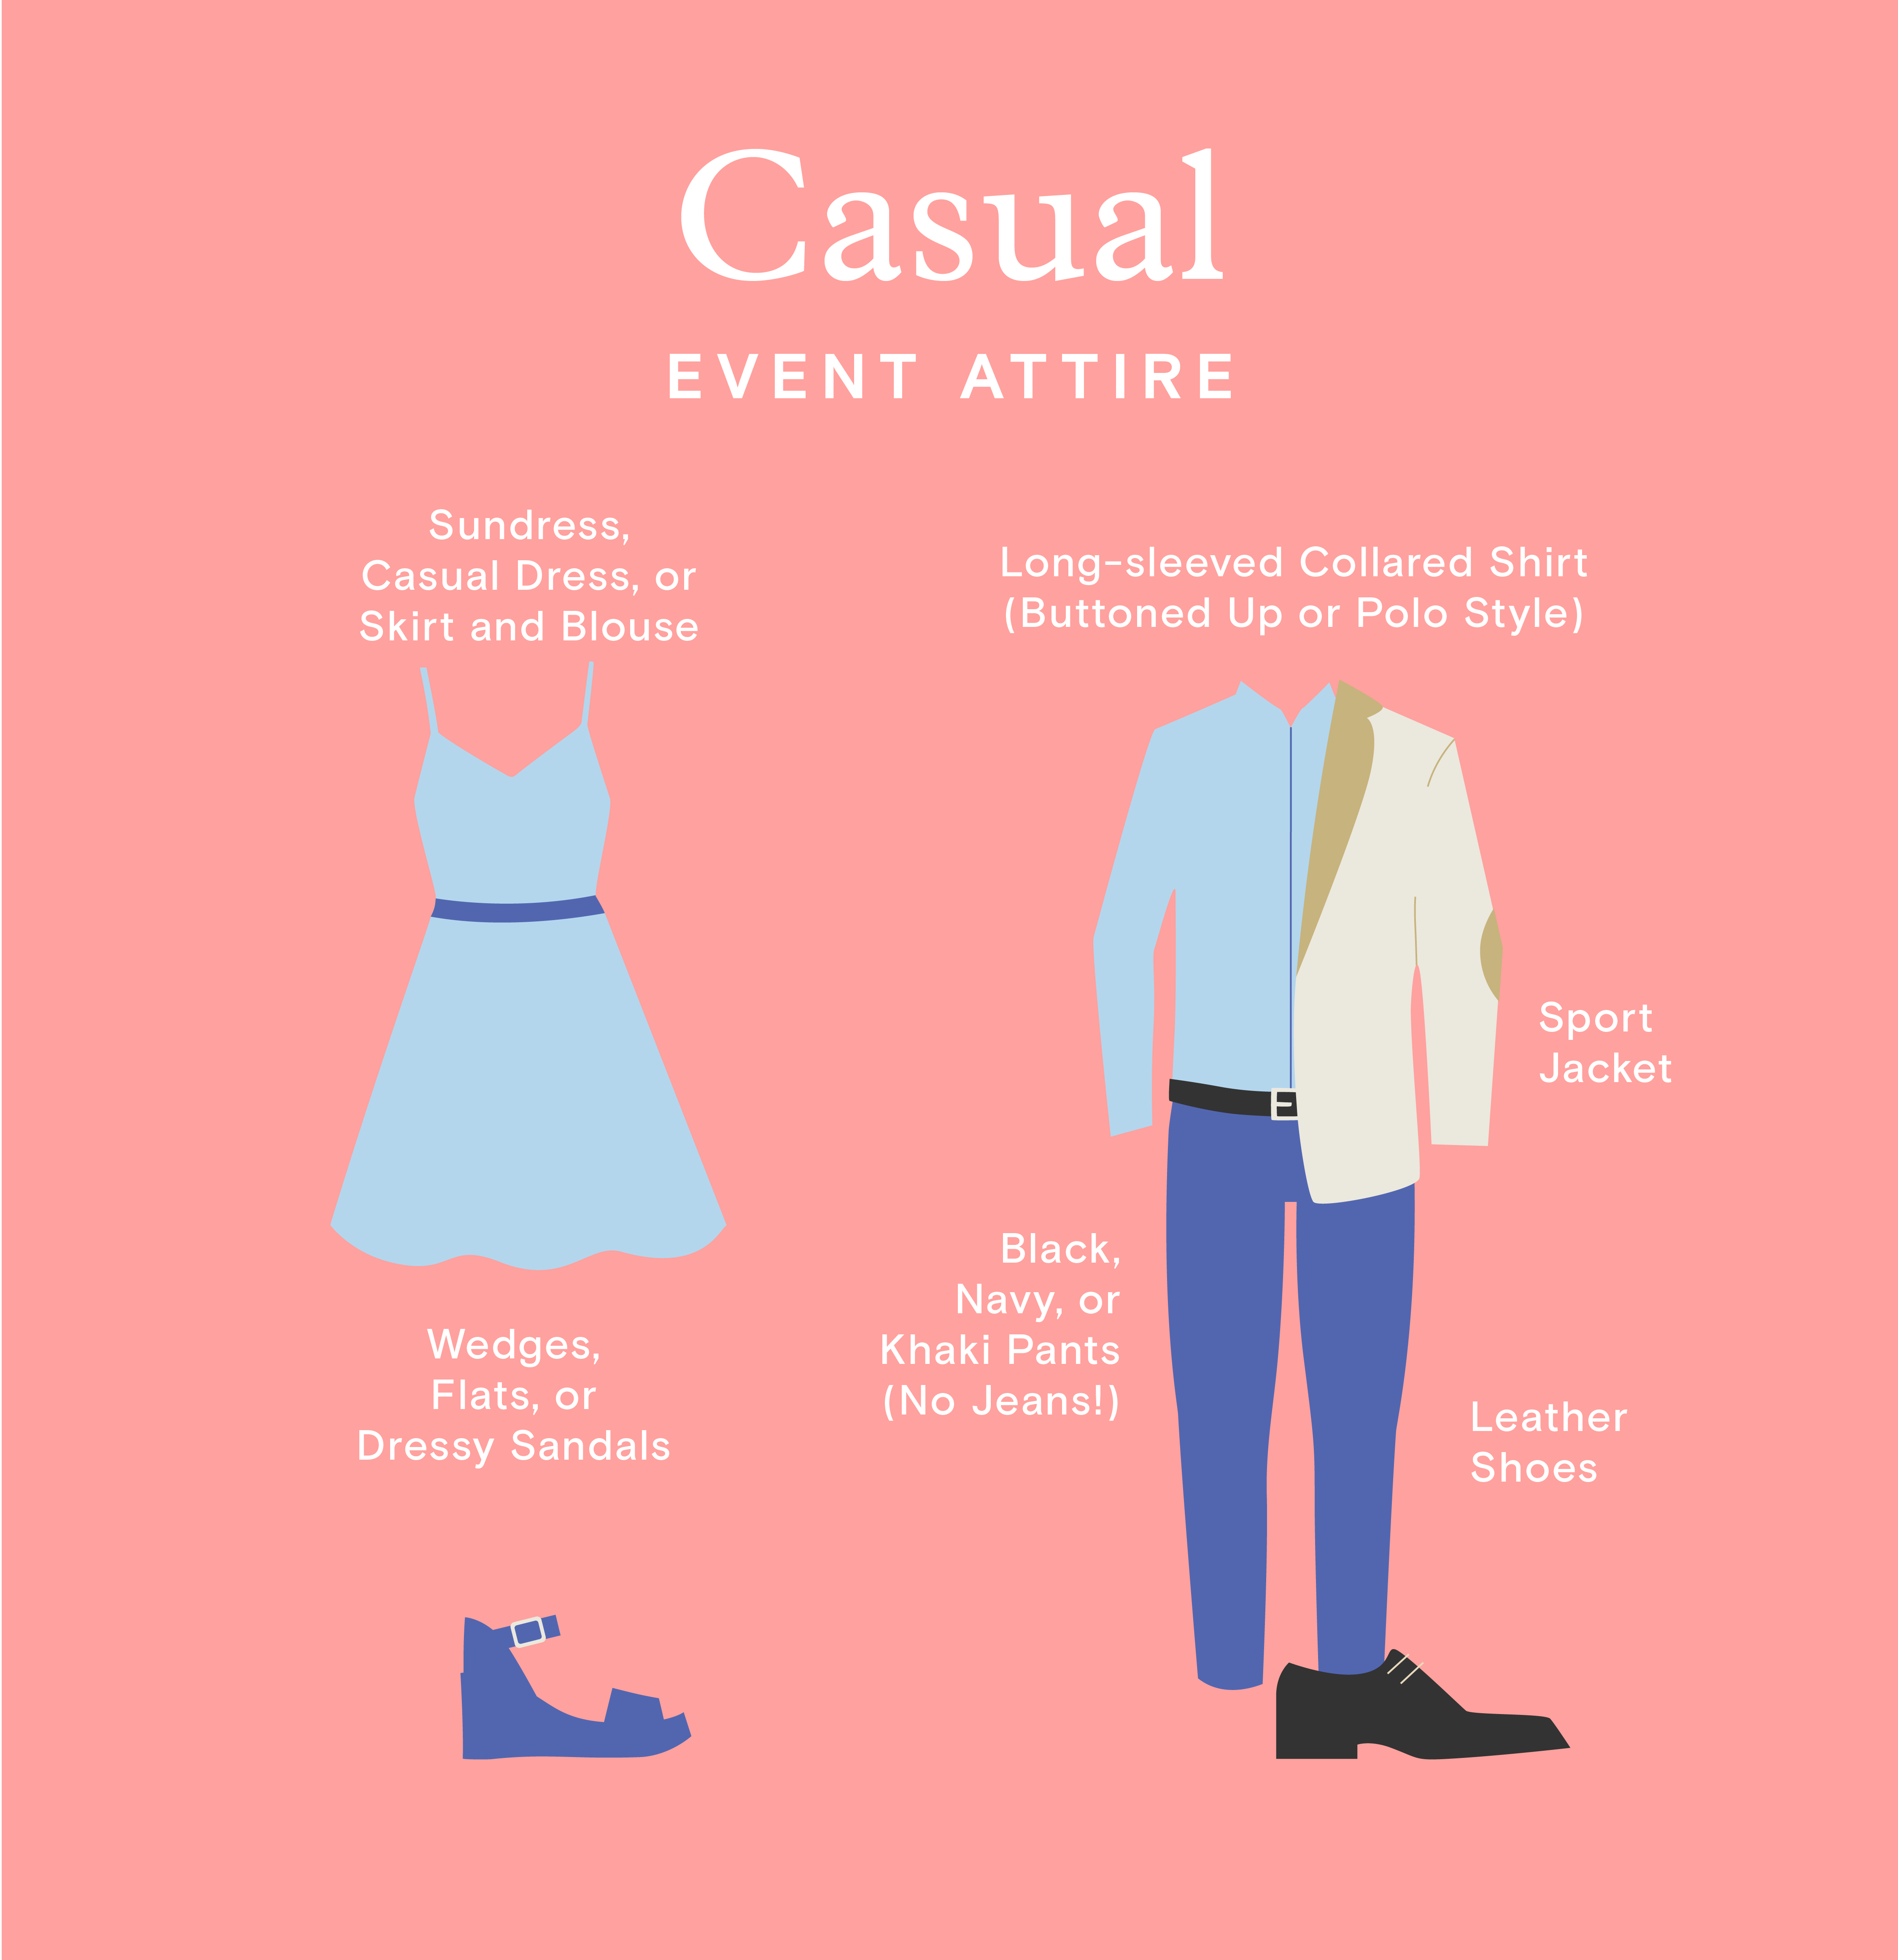 Decoding the Dress Code: Is Your Business Casual, Smart Casual, or For